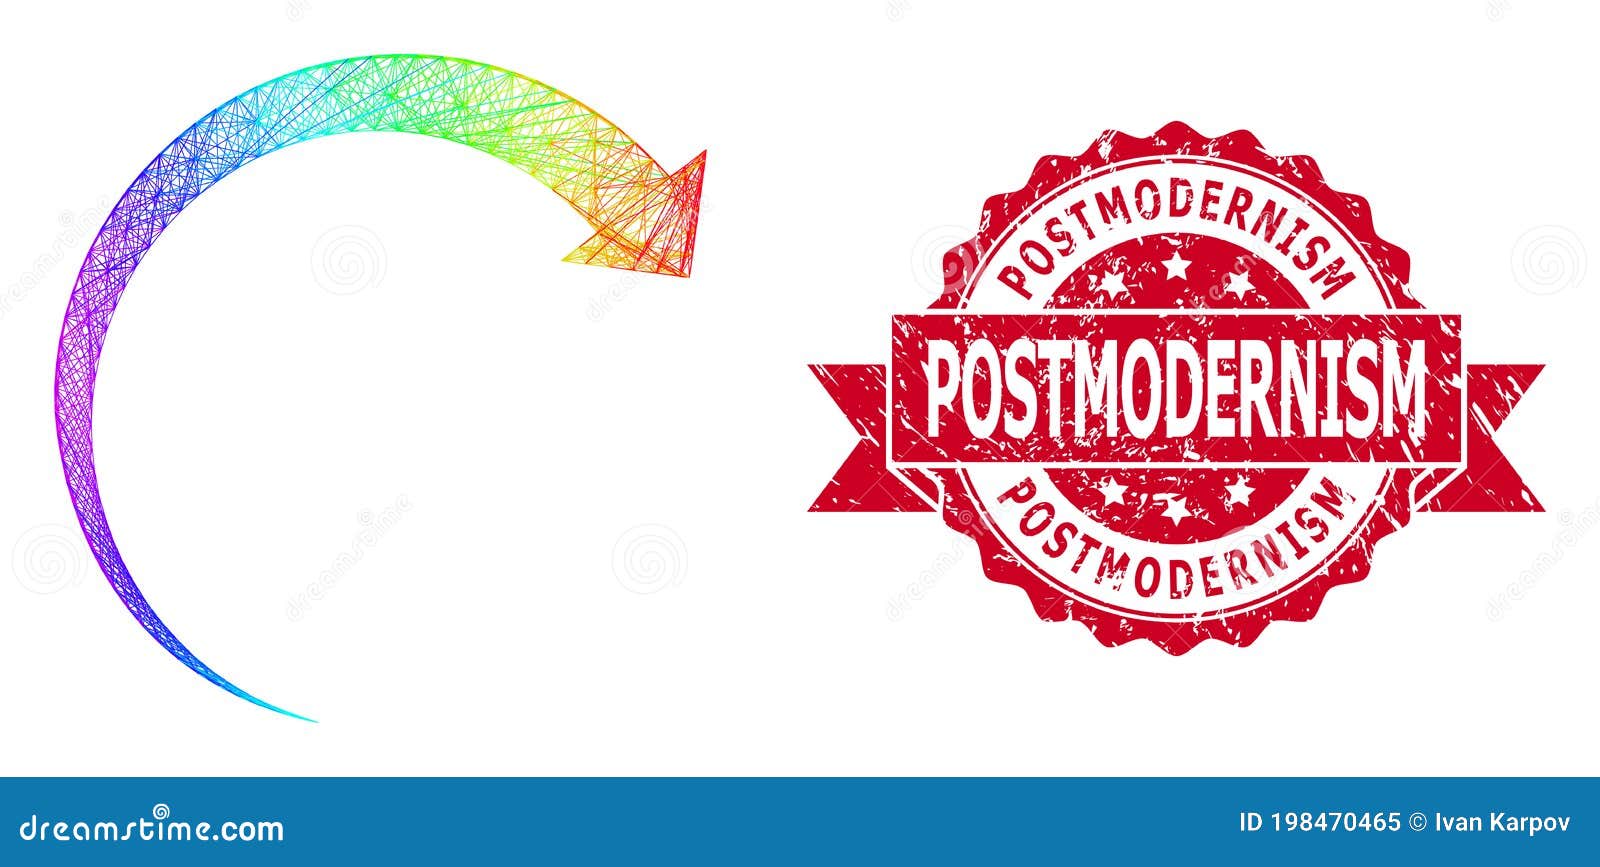 textured postmodernism seal and rainbow net rotate forward